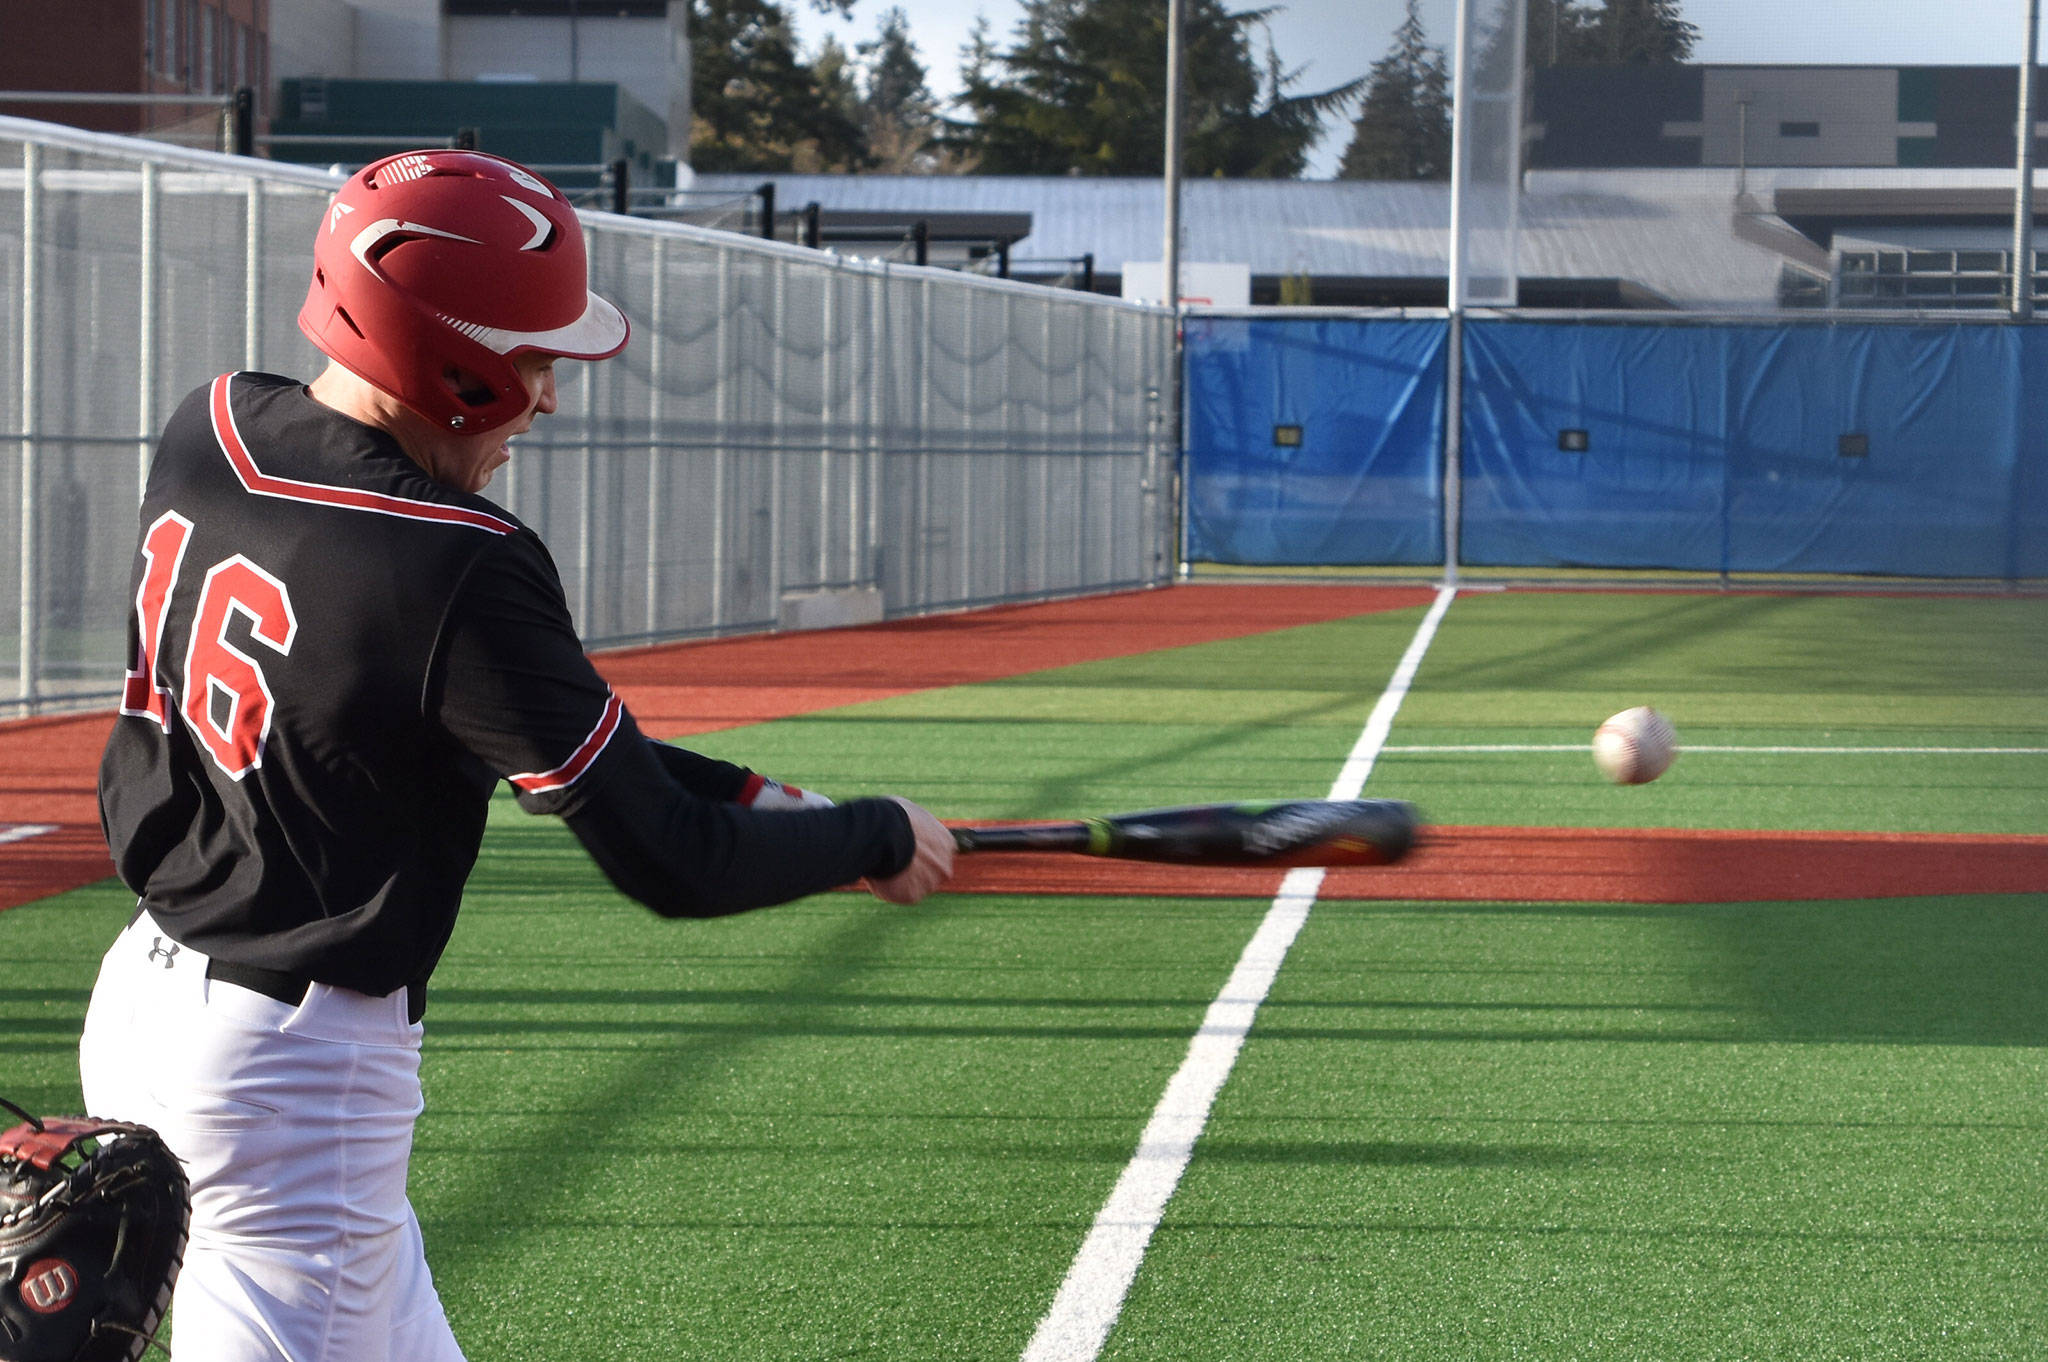 Coupeville’s Ulrik Wells attacks a pitch in Friday’s game with King’s.(Photo by Karen Carlson)